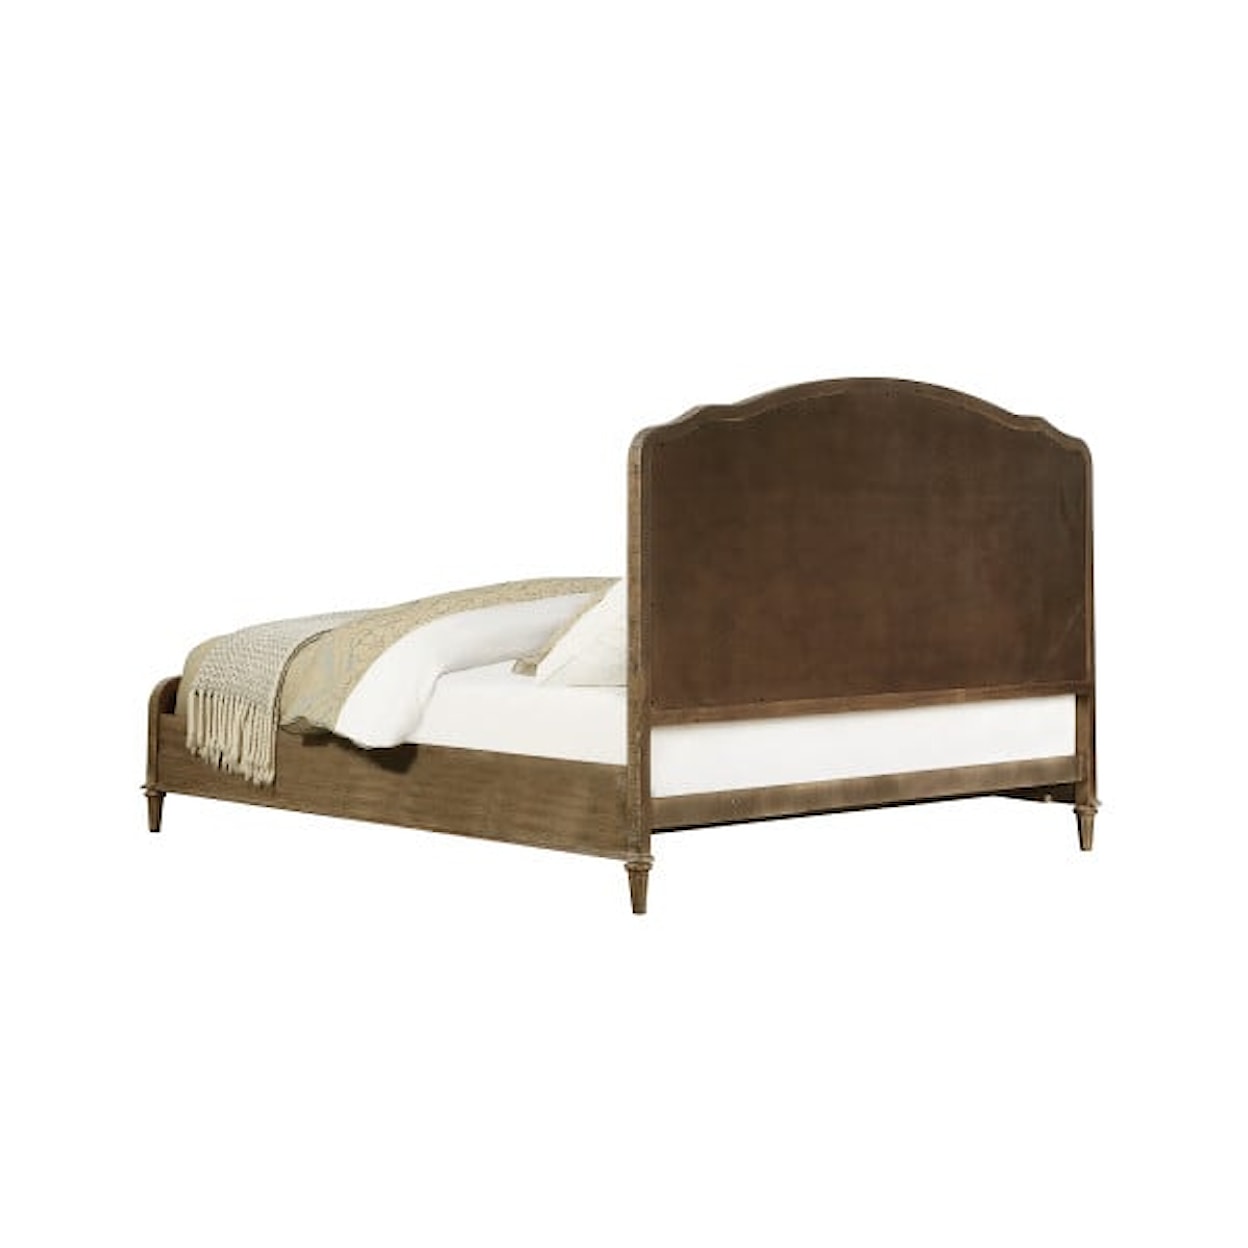 Emerald Interlude King Arched Panel Bed with Upholstery